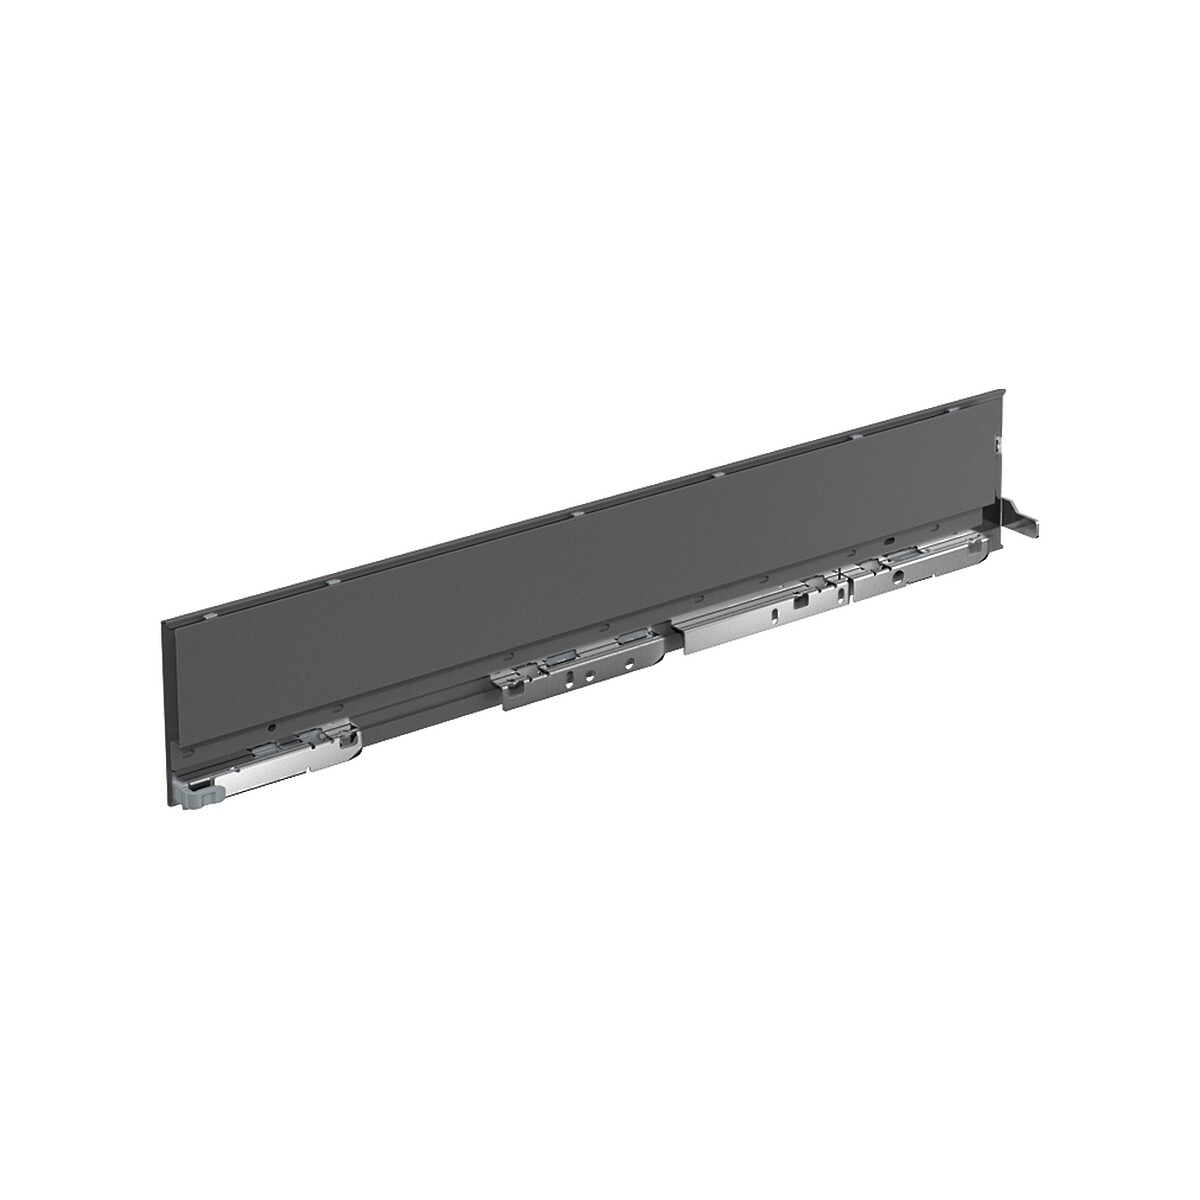 AvanTech YOU Drawer side profile, height 101 mm x NL 550 mm, Anthracite, Left